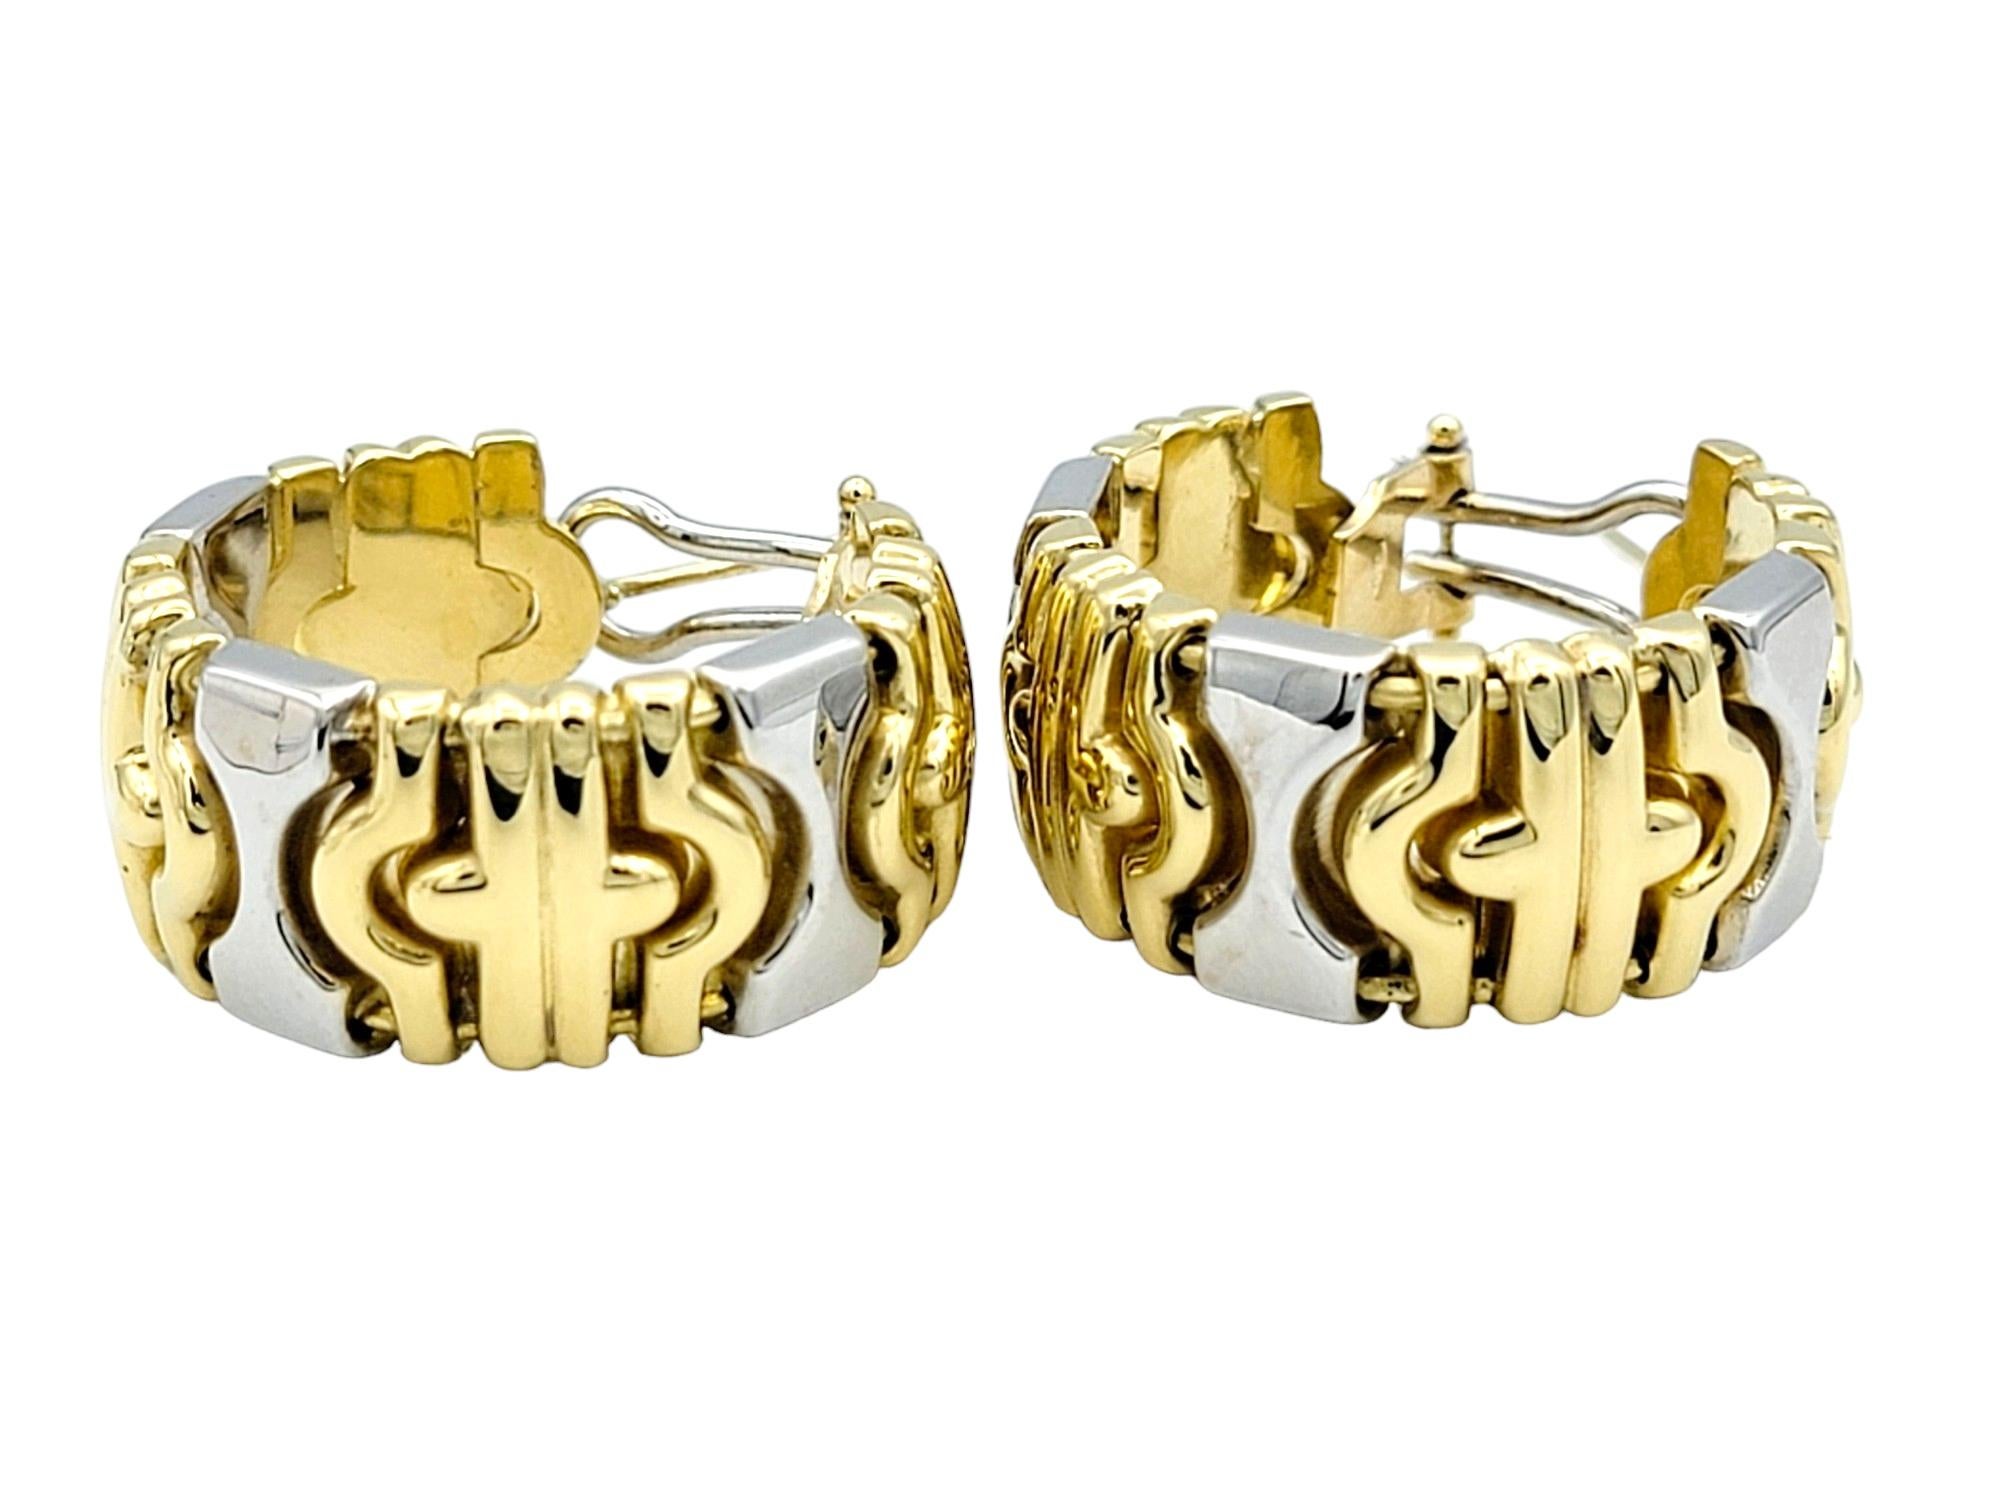 Two-Tone 18 Karat Yellow and White Gold Chunky Ridged Hooped Earrings  In Good Condition For Sale In Scottsdale, AZ